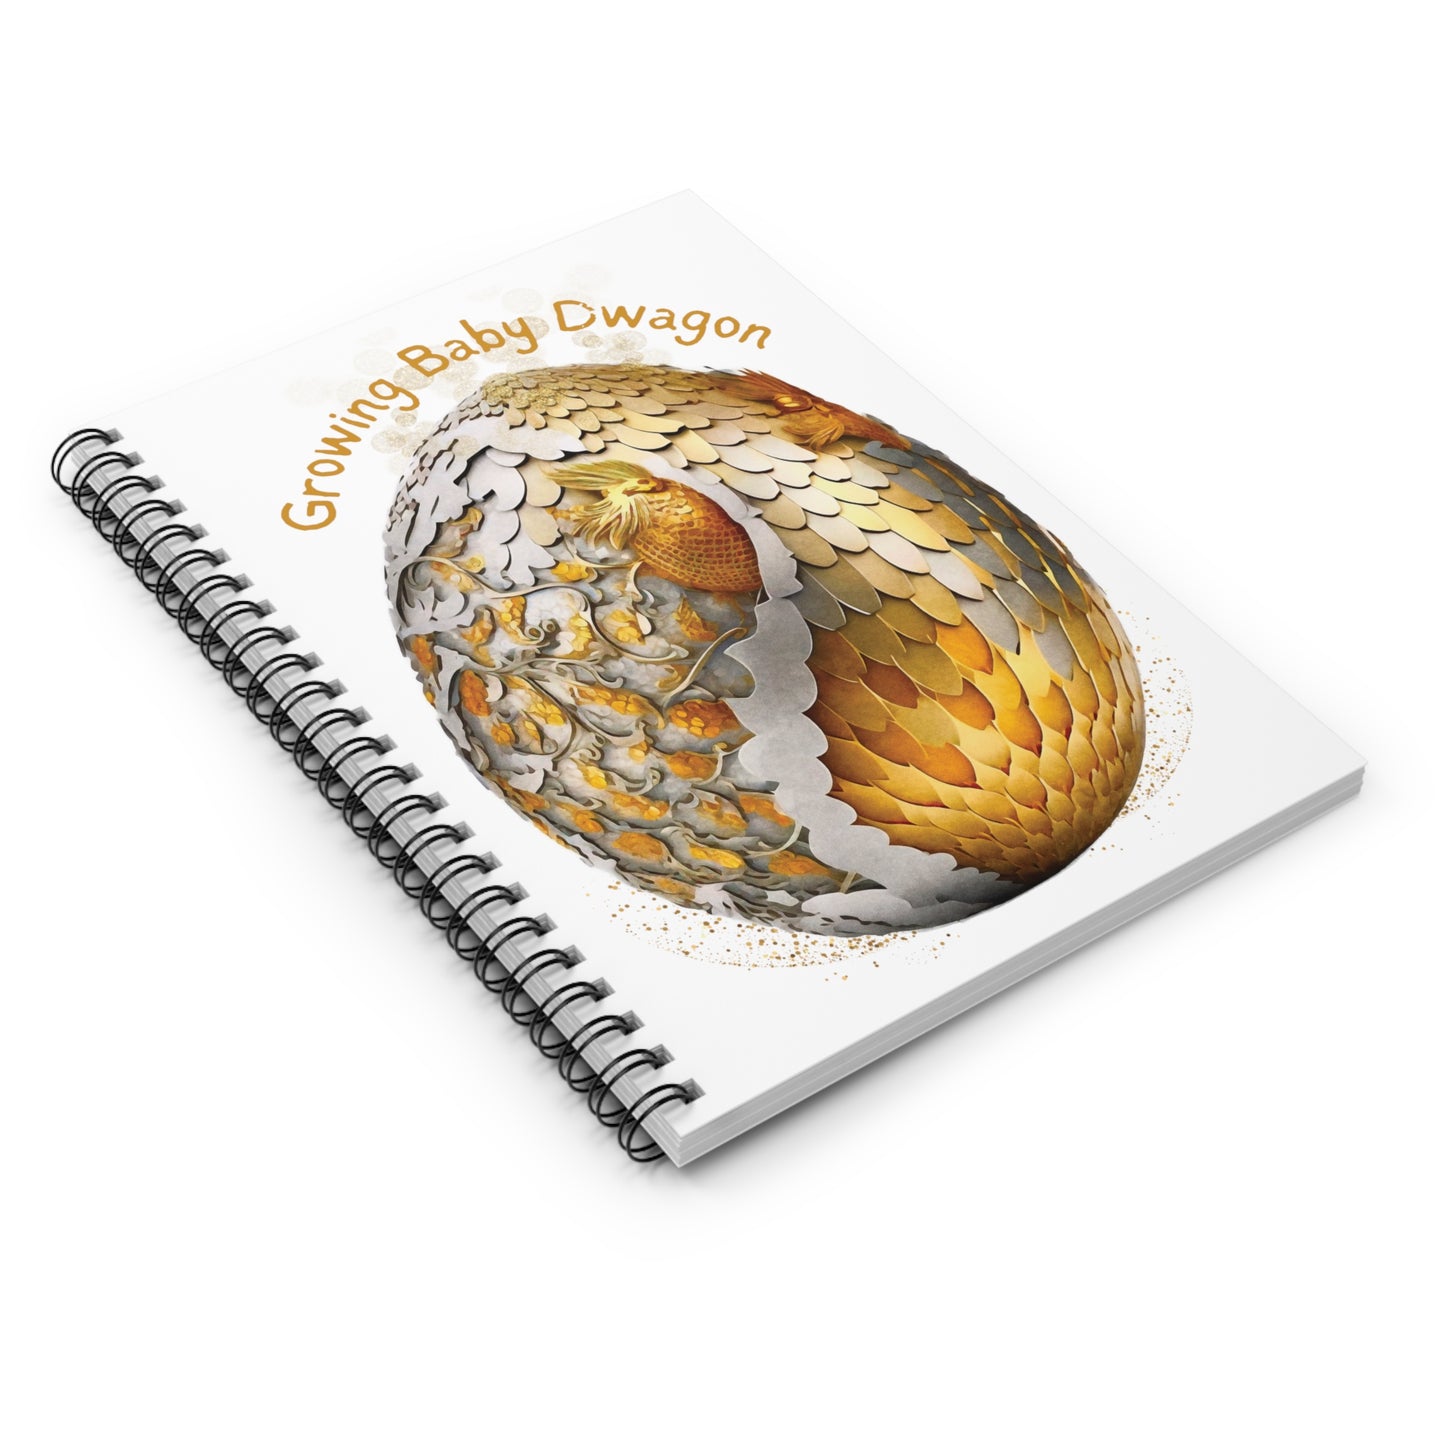 Growing Baby Dragon Spiral Notebook - Ruled Line Perfect Gift - Baby Shower - New Mom